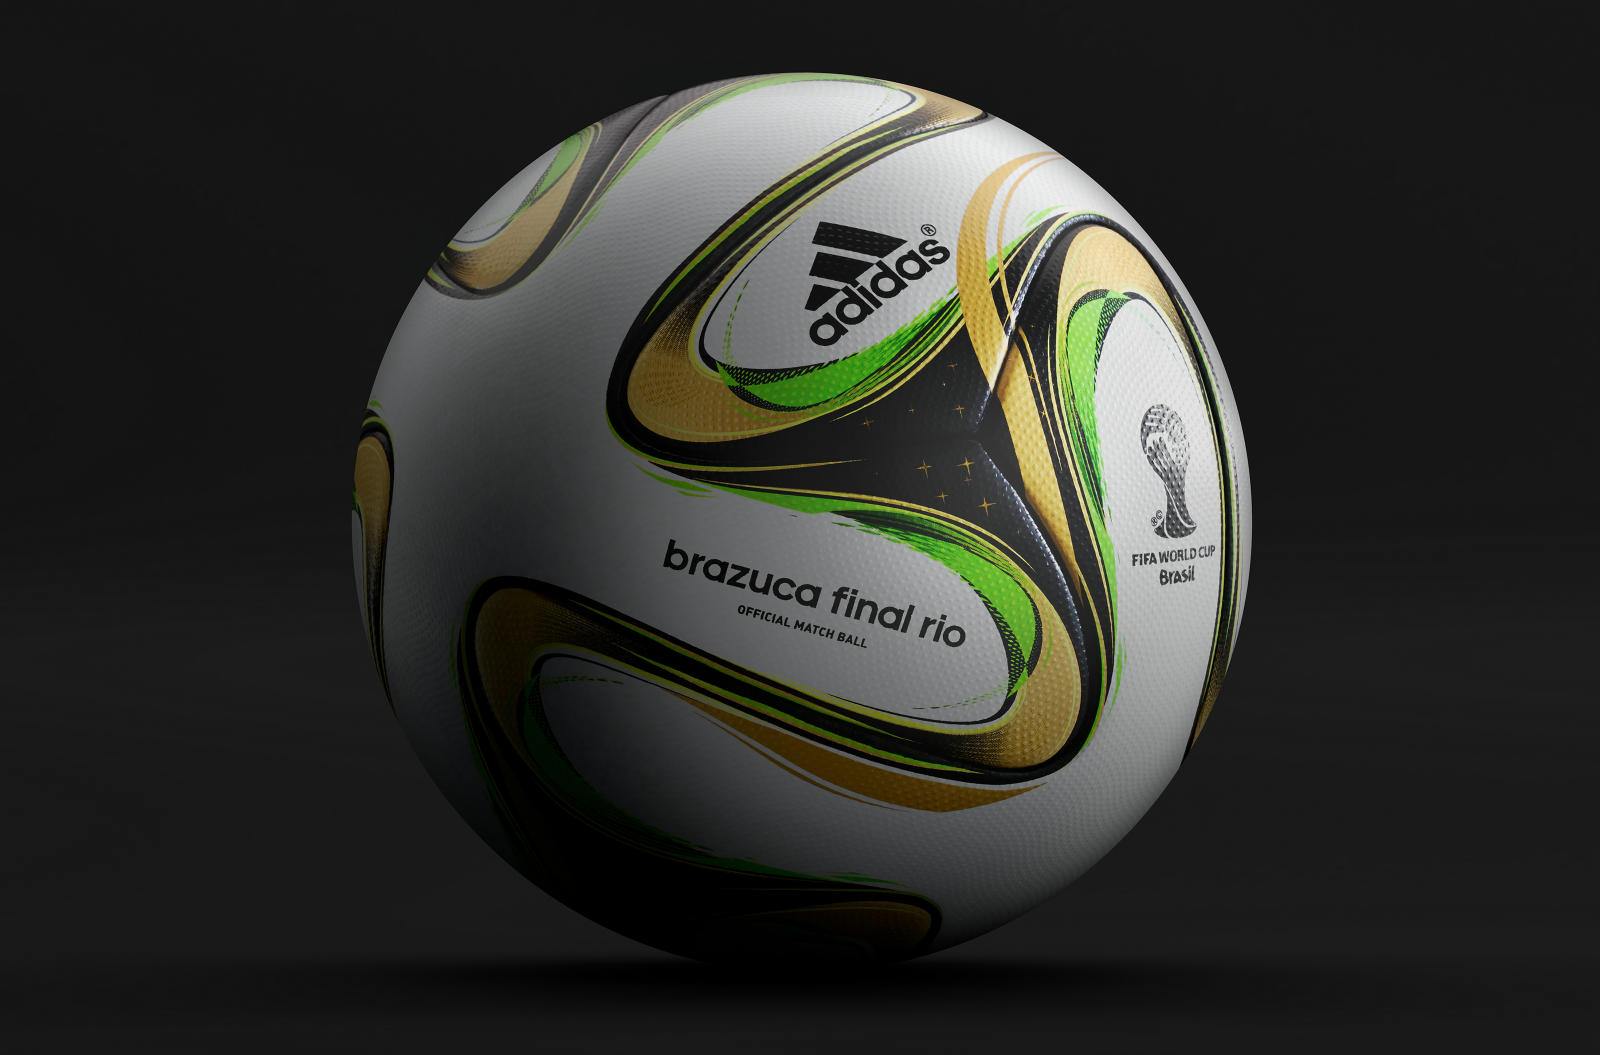 Adidas Brazuca 2014 World Cup Final Rio Ball Released - Footy Headlines